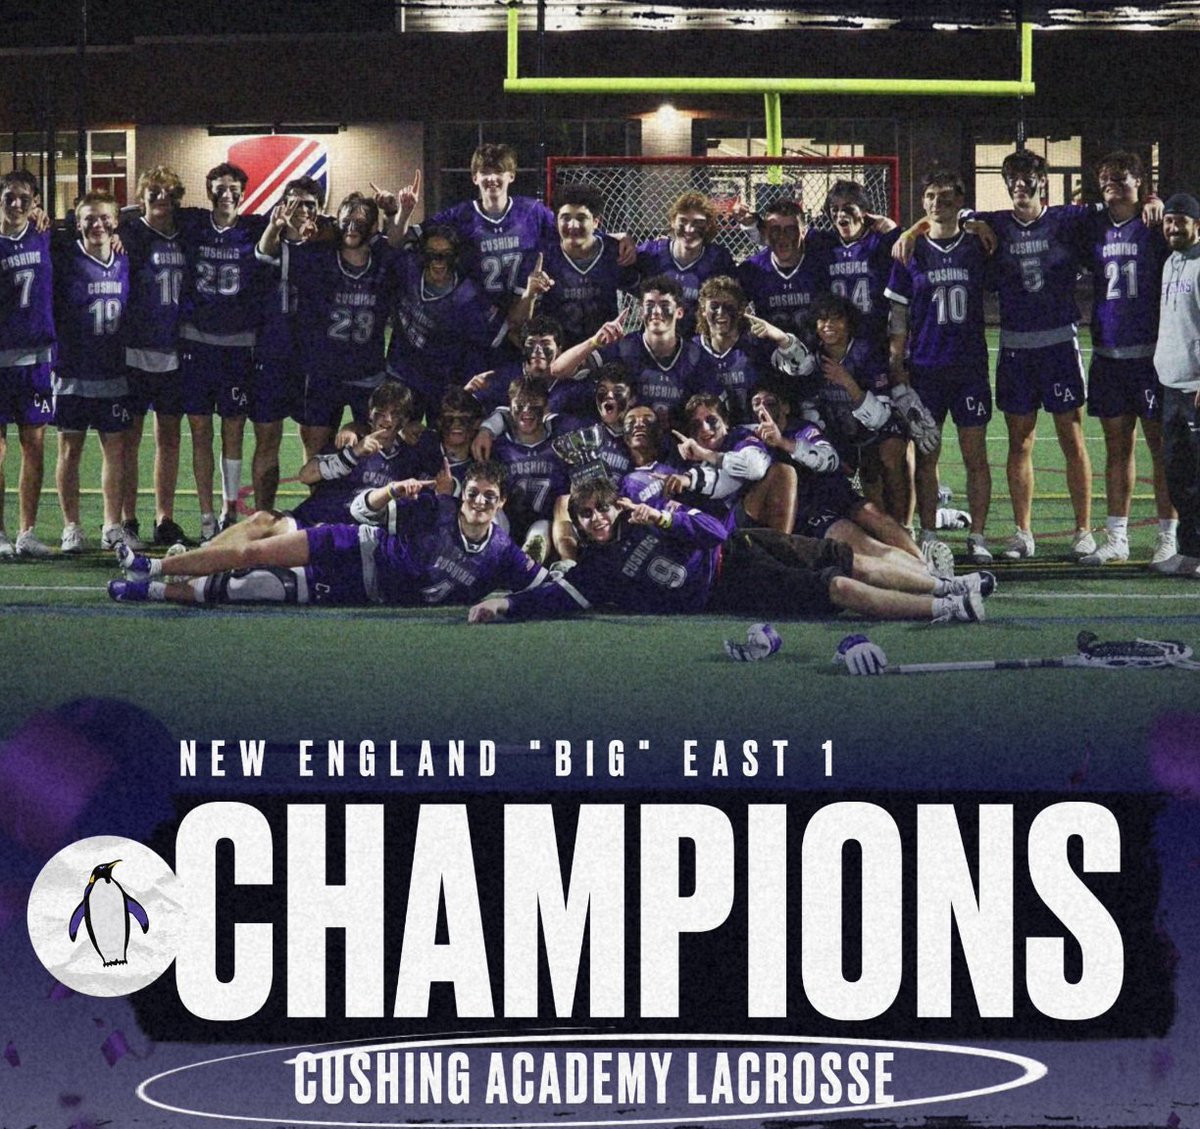 Congratulations to @cushingblax on their New England 'Big East' Championship! They beat a strong @pingreelacrosse team 8-7. Unbelievable season! Congratulations to the team, Coach Kline and Coach Pearson! #rollpens🐧 #postseason #lacrosse #prepschool #champions #cushingathletes